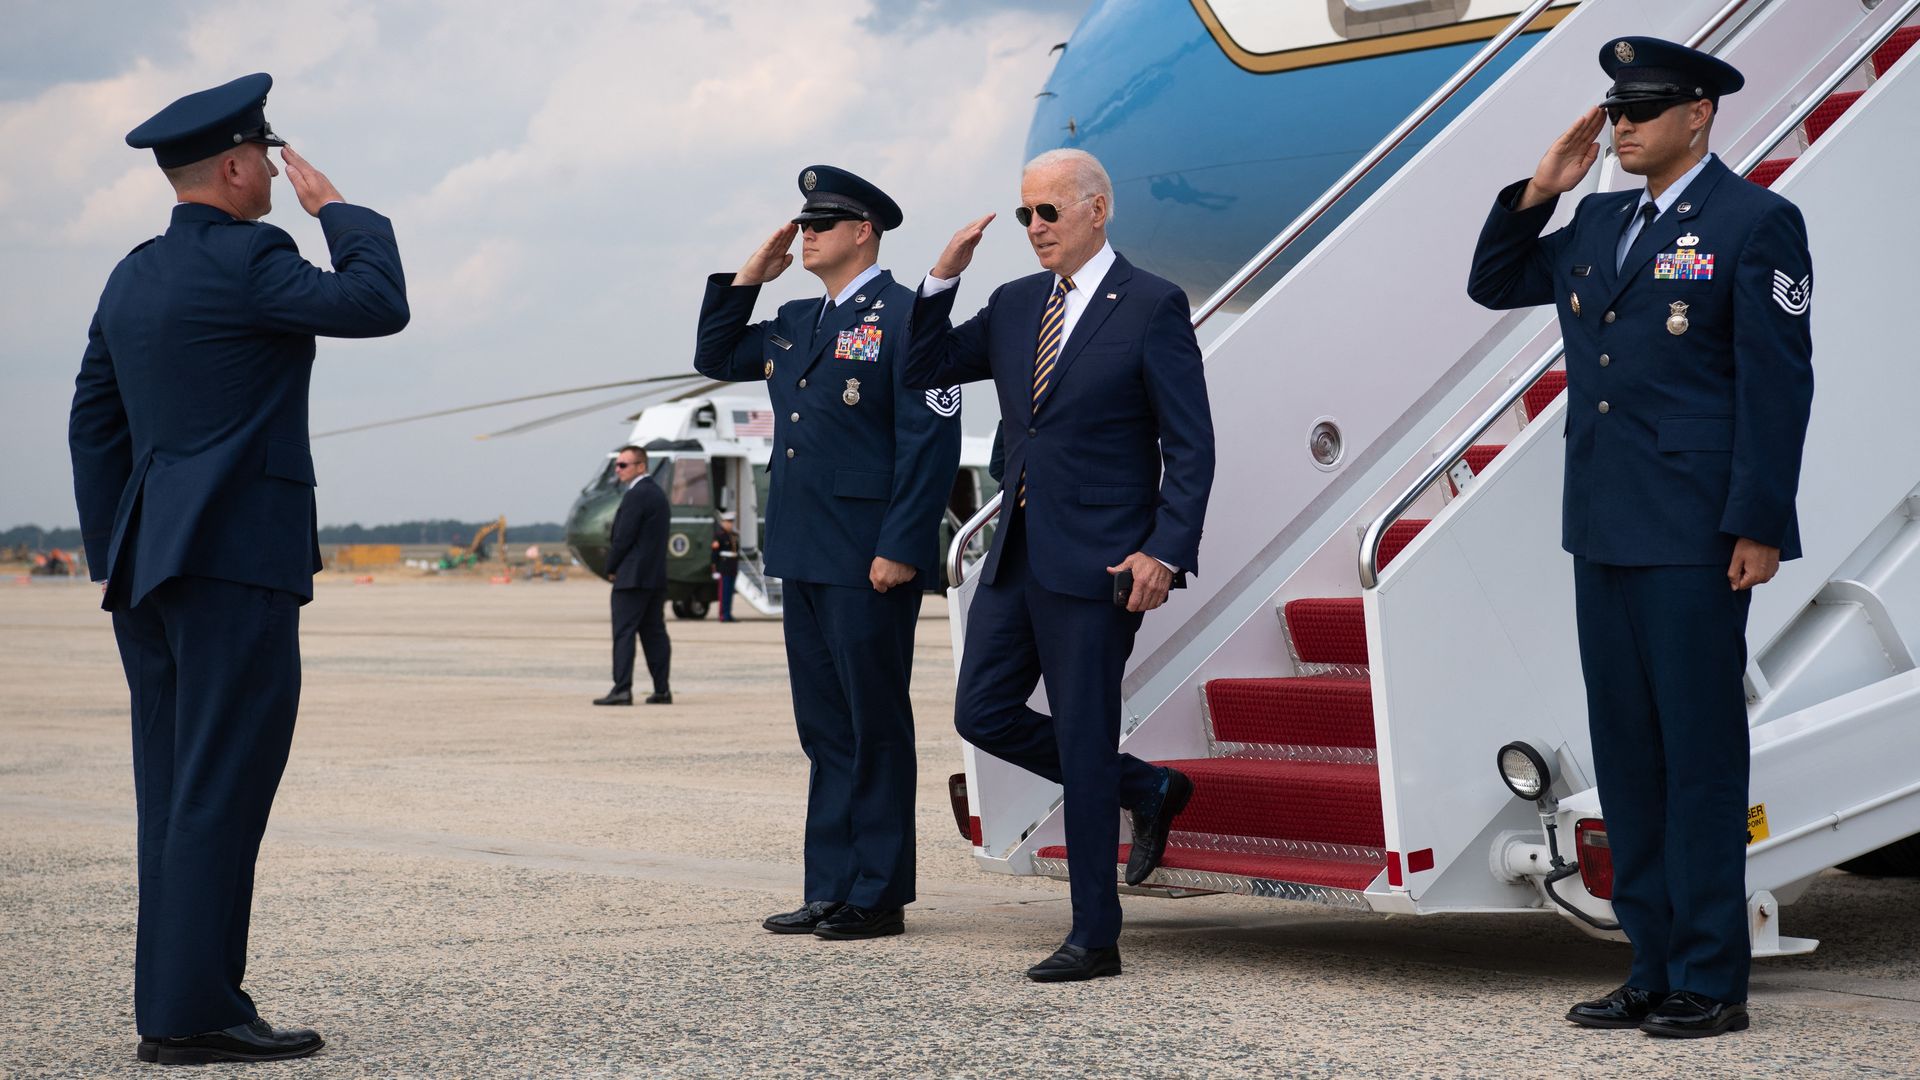 President Biden is seen returning the salutes of members of the Air Force after arriving back at Joint Base Andrews.